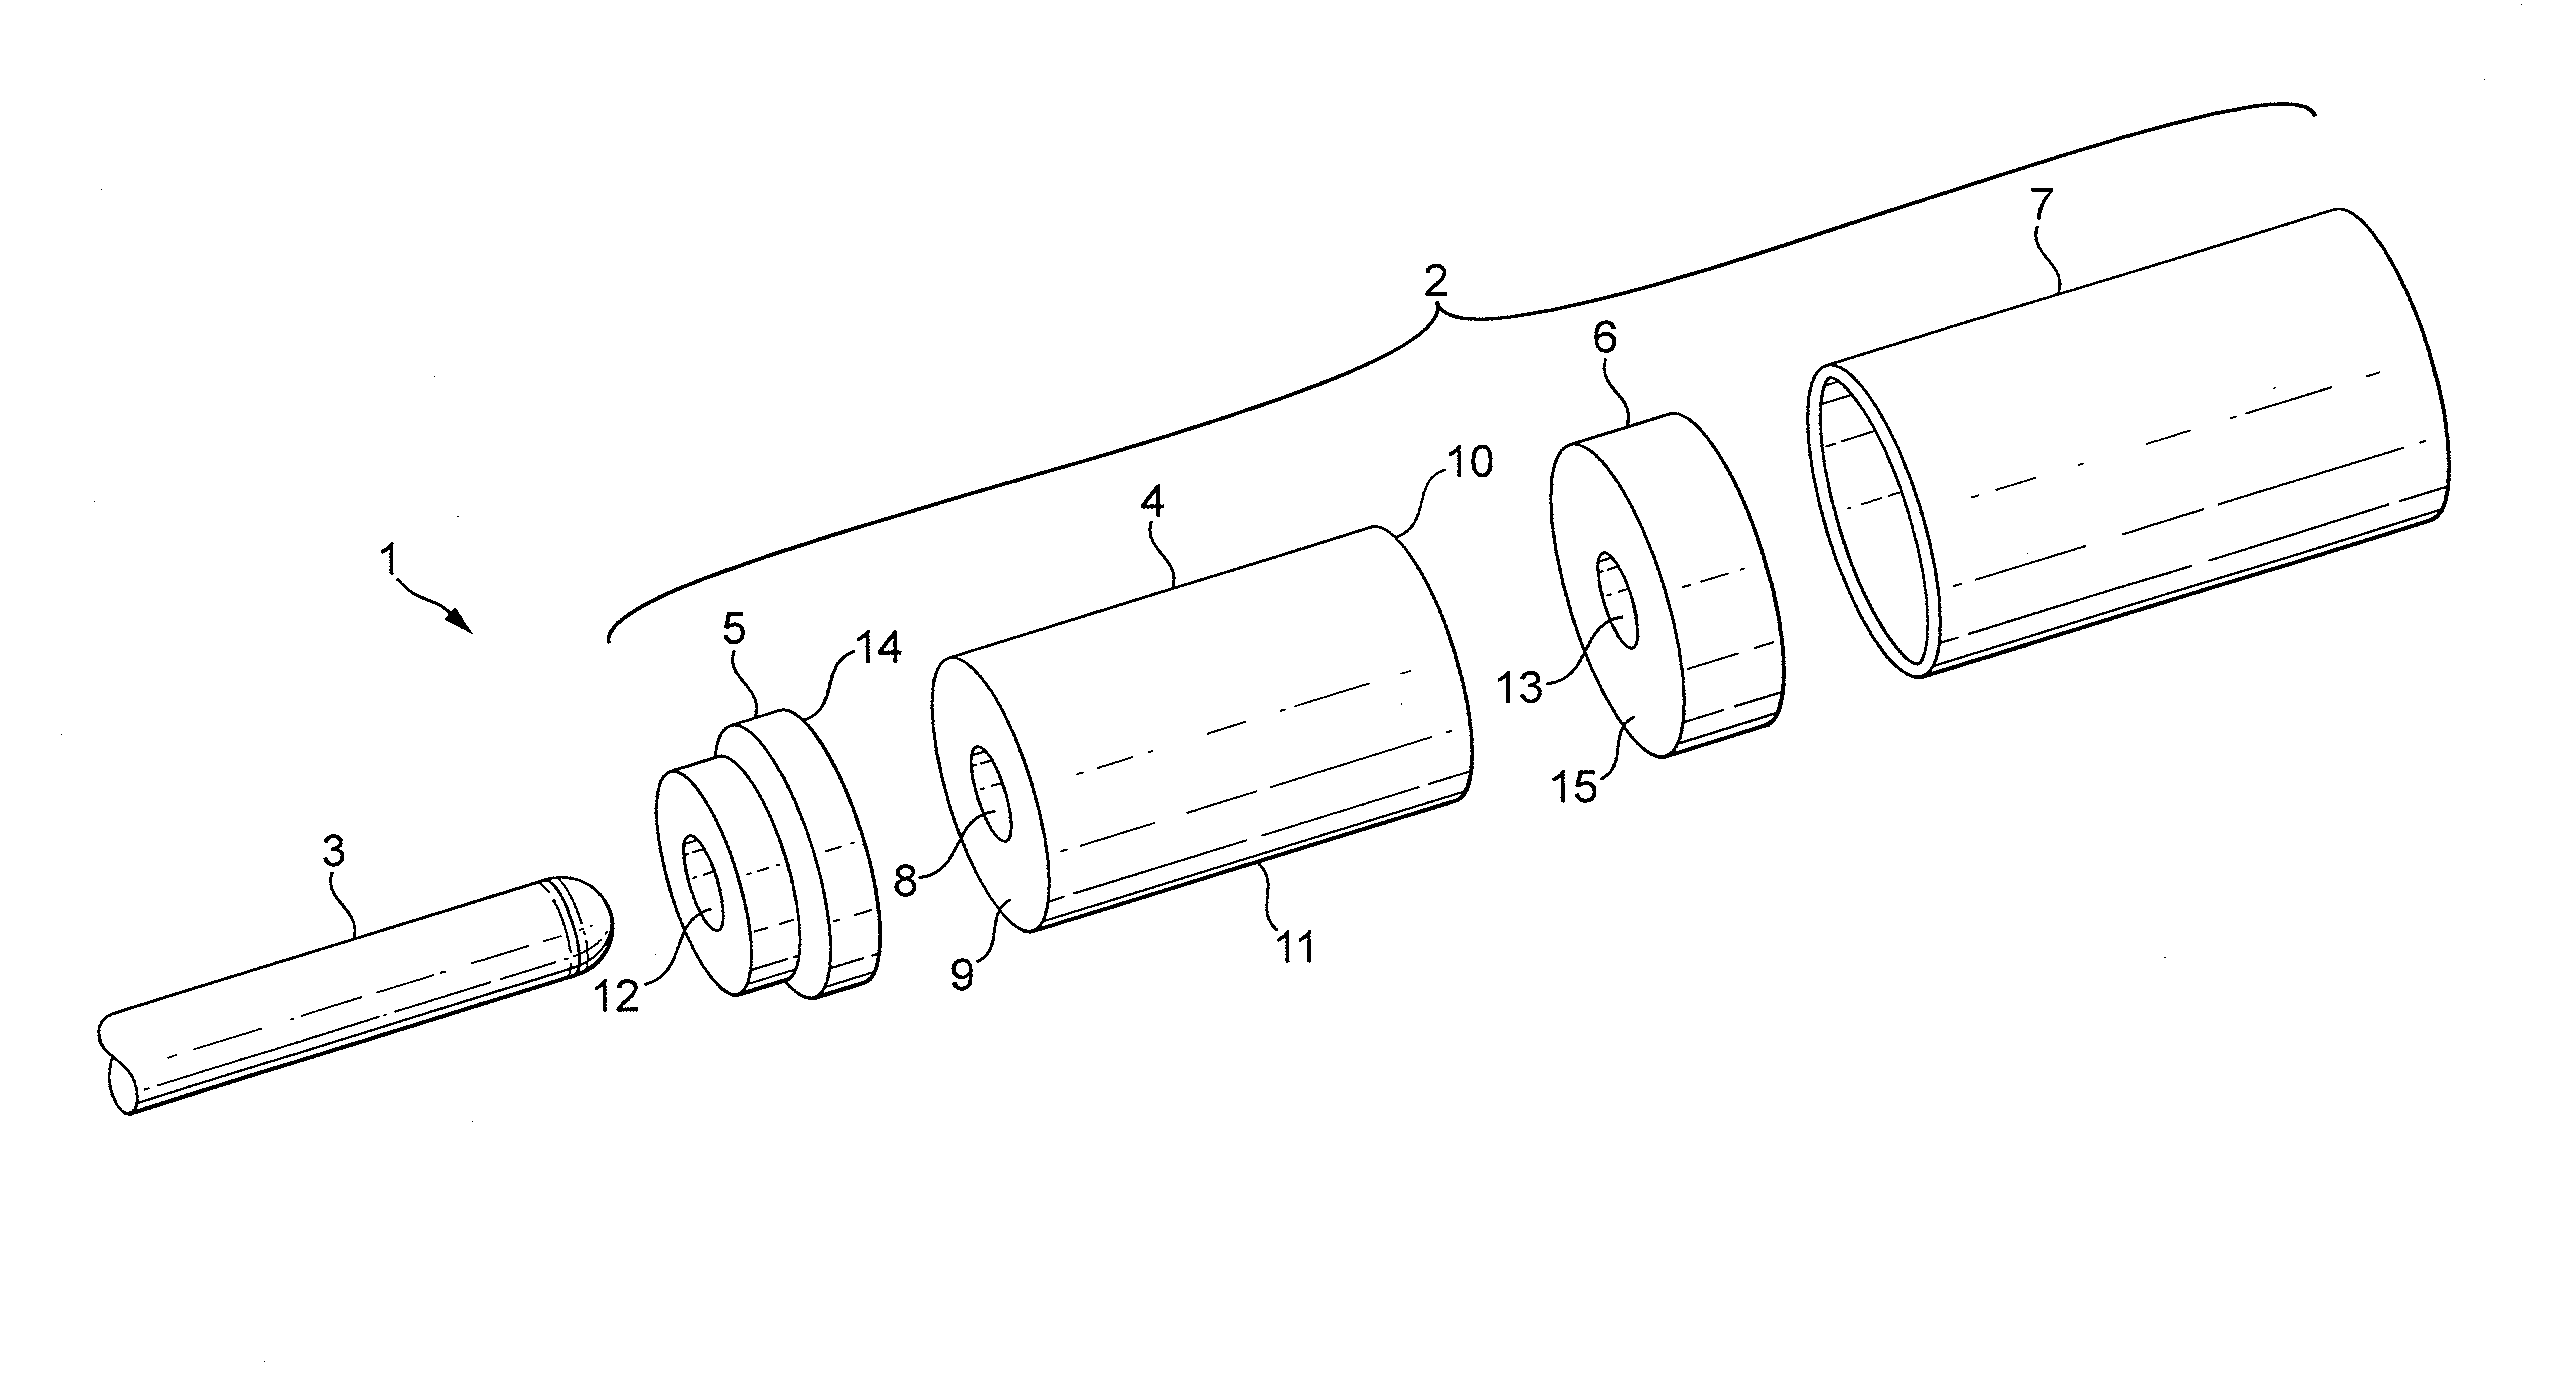 Rotor core assembly